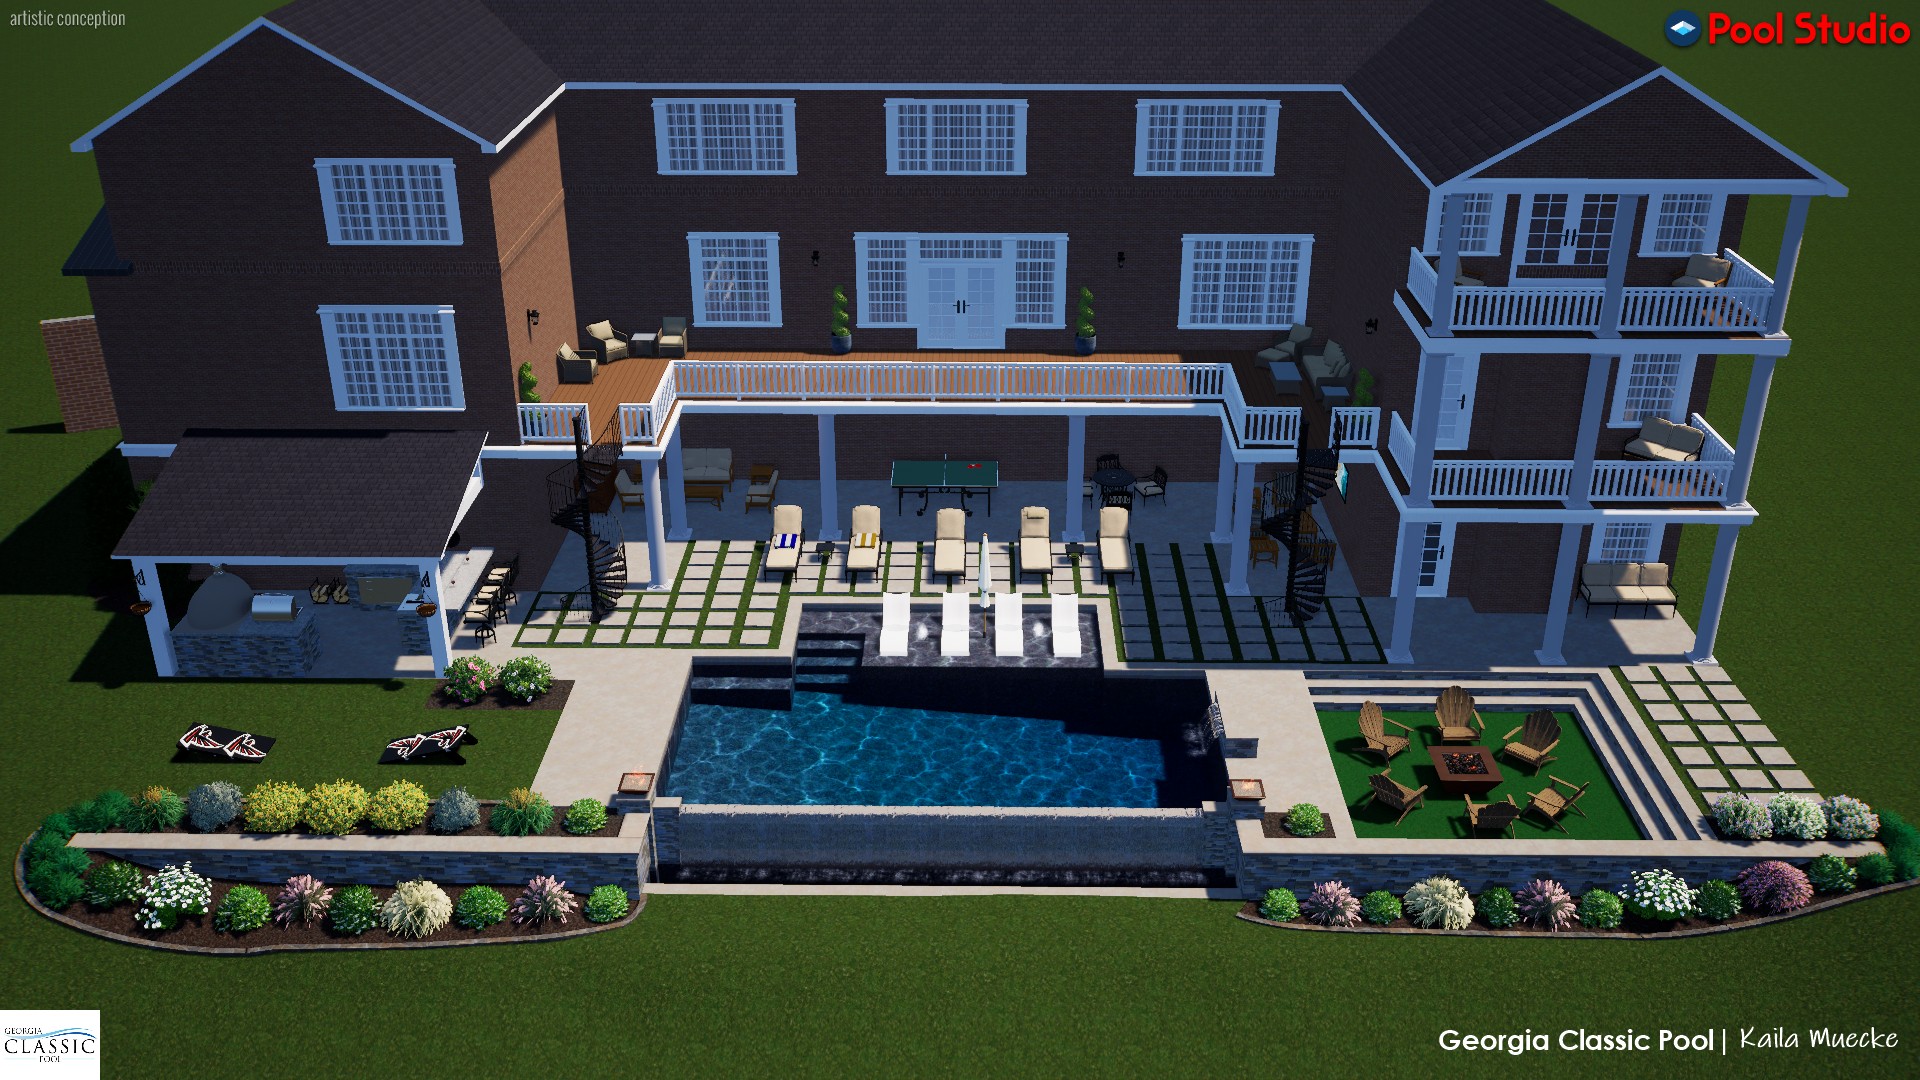 An avant-garde 3D swimming pool design featuring modern aesthetics, a stylish cabana, a fully equipped kitchen, and a sunken firepit area for the ultimate outdoor sanctuary.